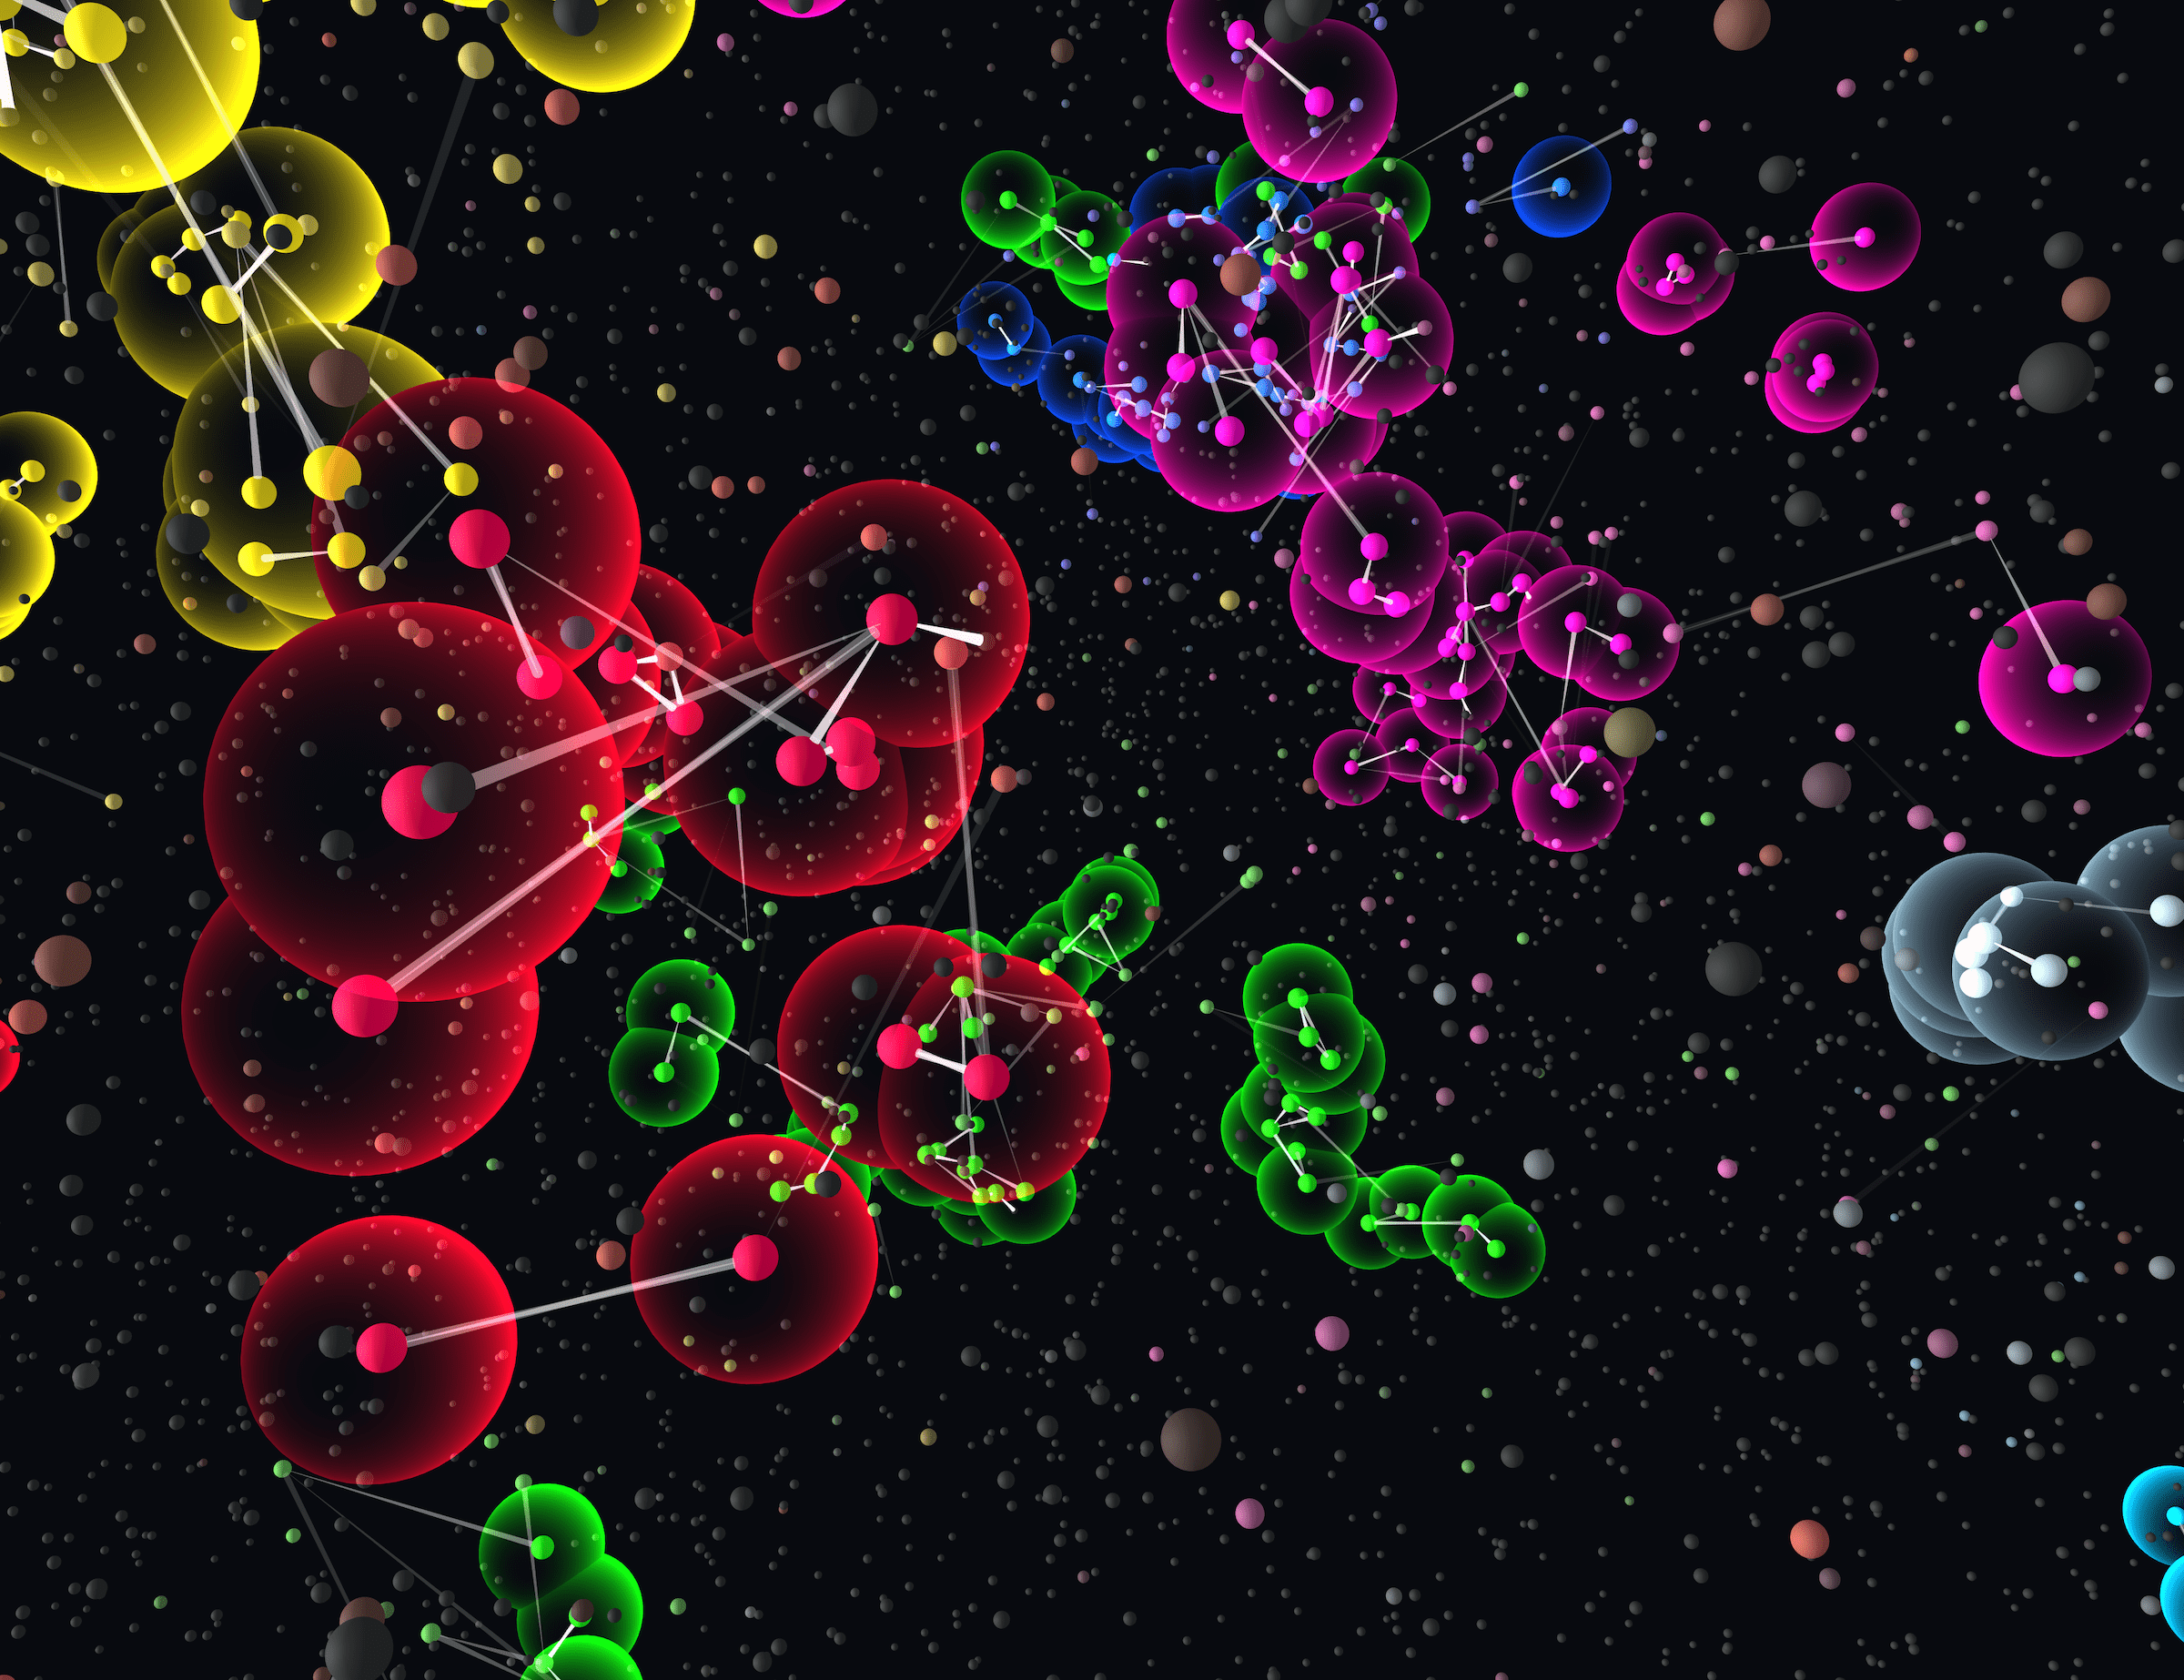 A close-up of the Fermi Paradox visualization while showing the 3D version of the settled systems